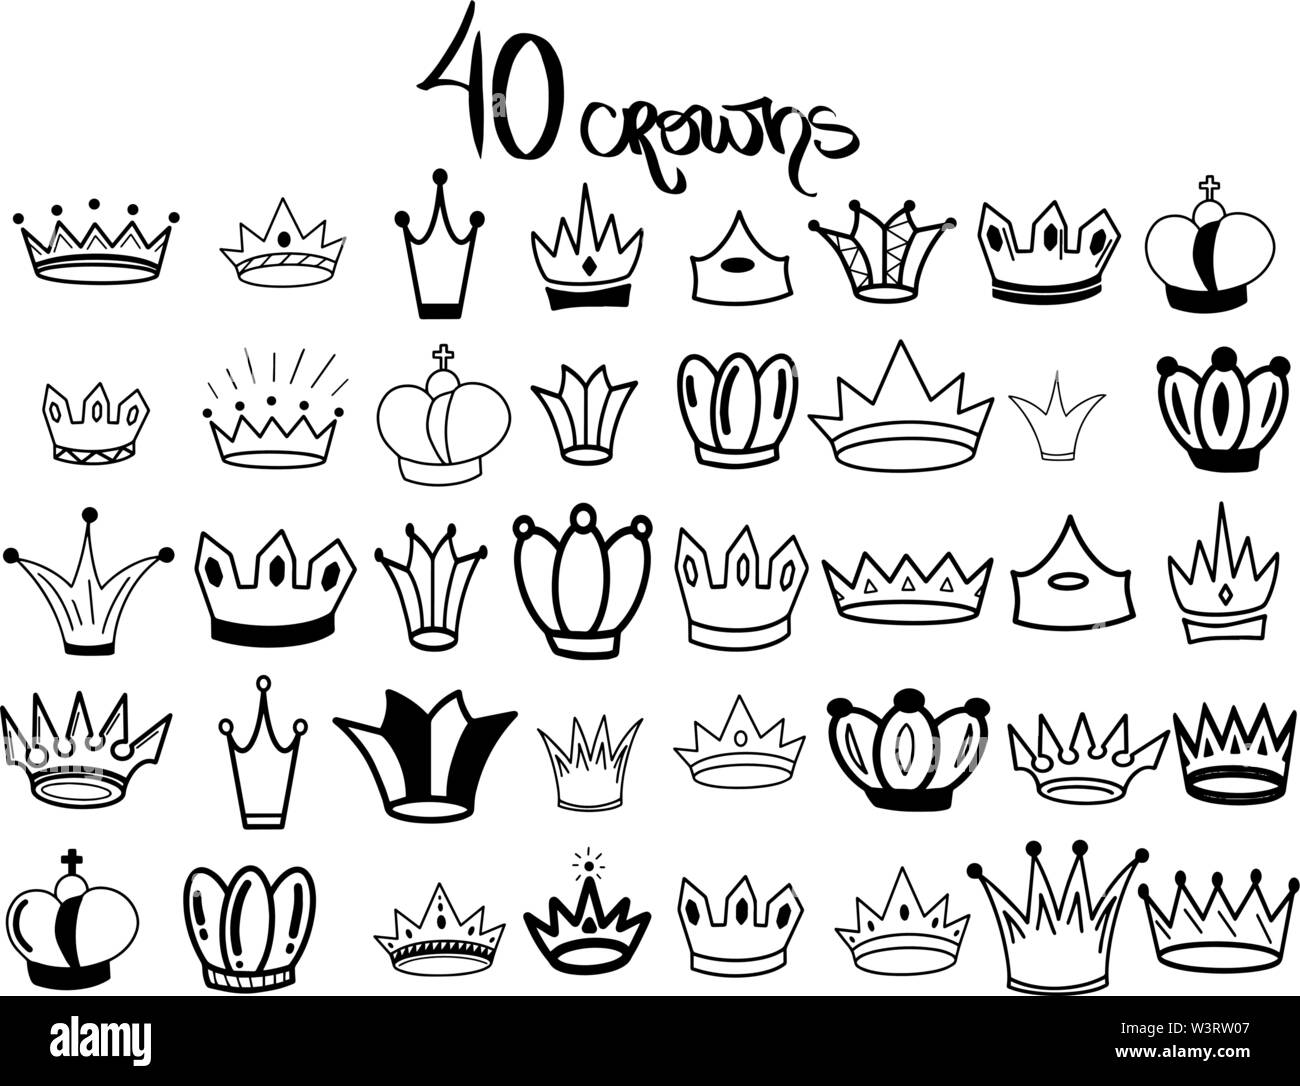 How to Draw a Princess Crown  Easy Drawing for Kids Toddlers  sunny kids  art   YouTube